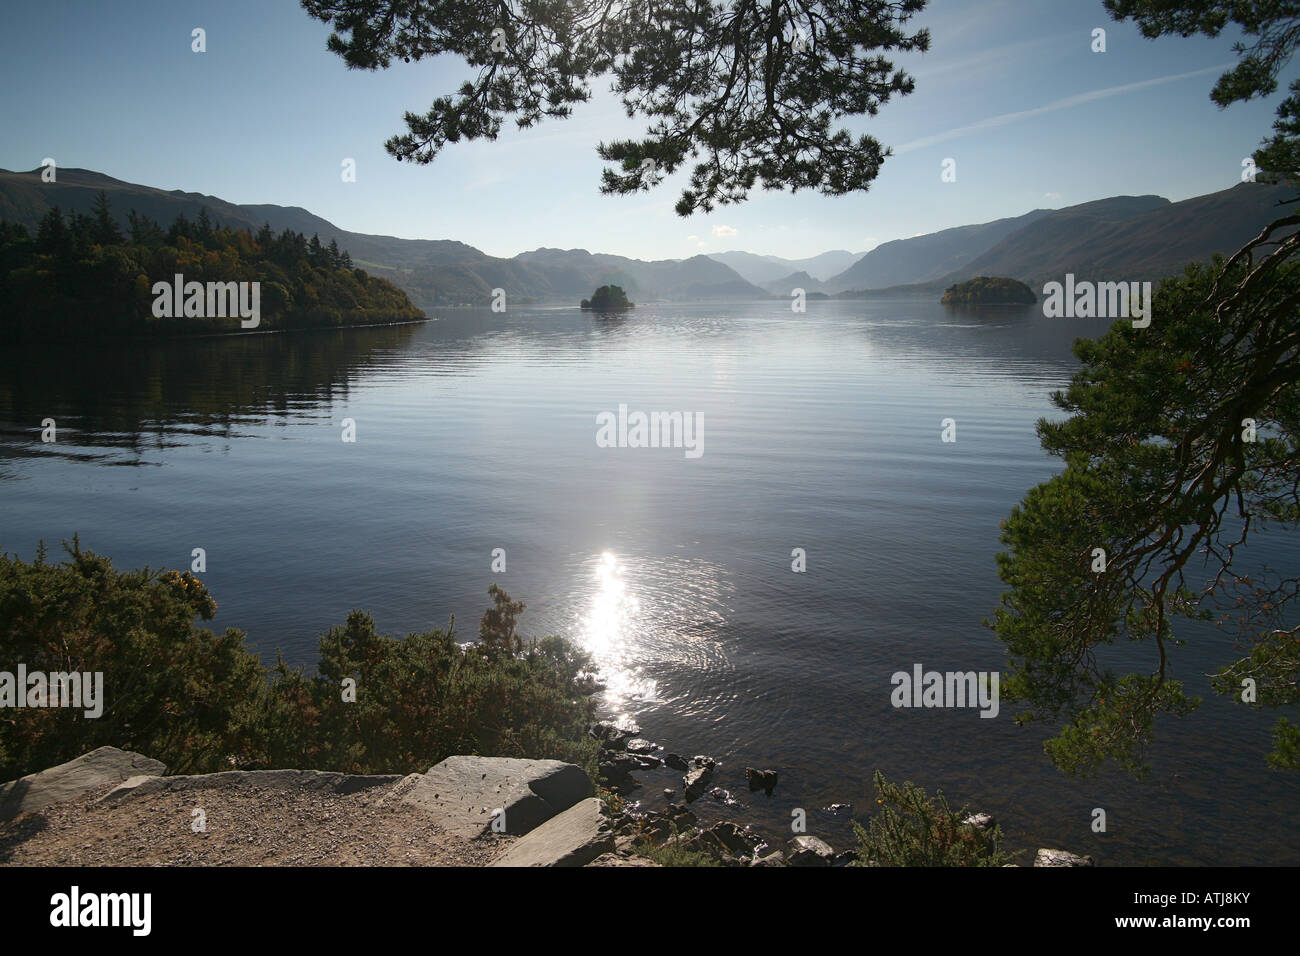 Trees water lake sun reflections ' overhanging sun trees'rockery 'islands in lake' mountains hills Stock Photo